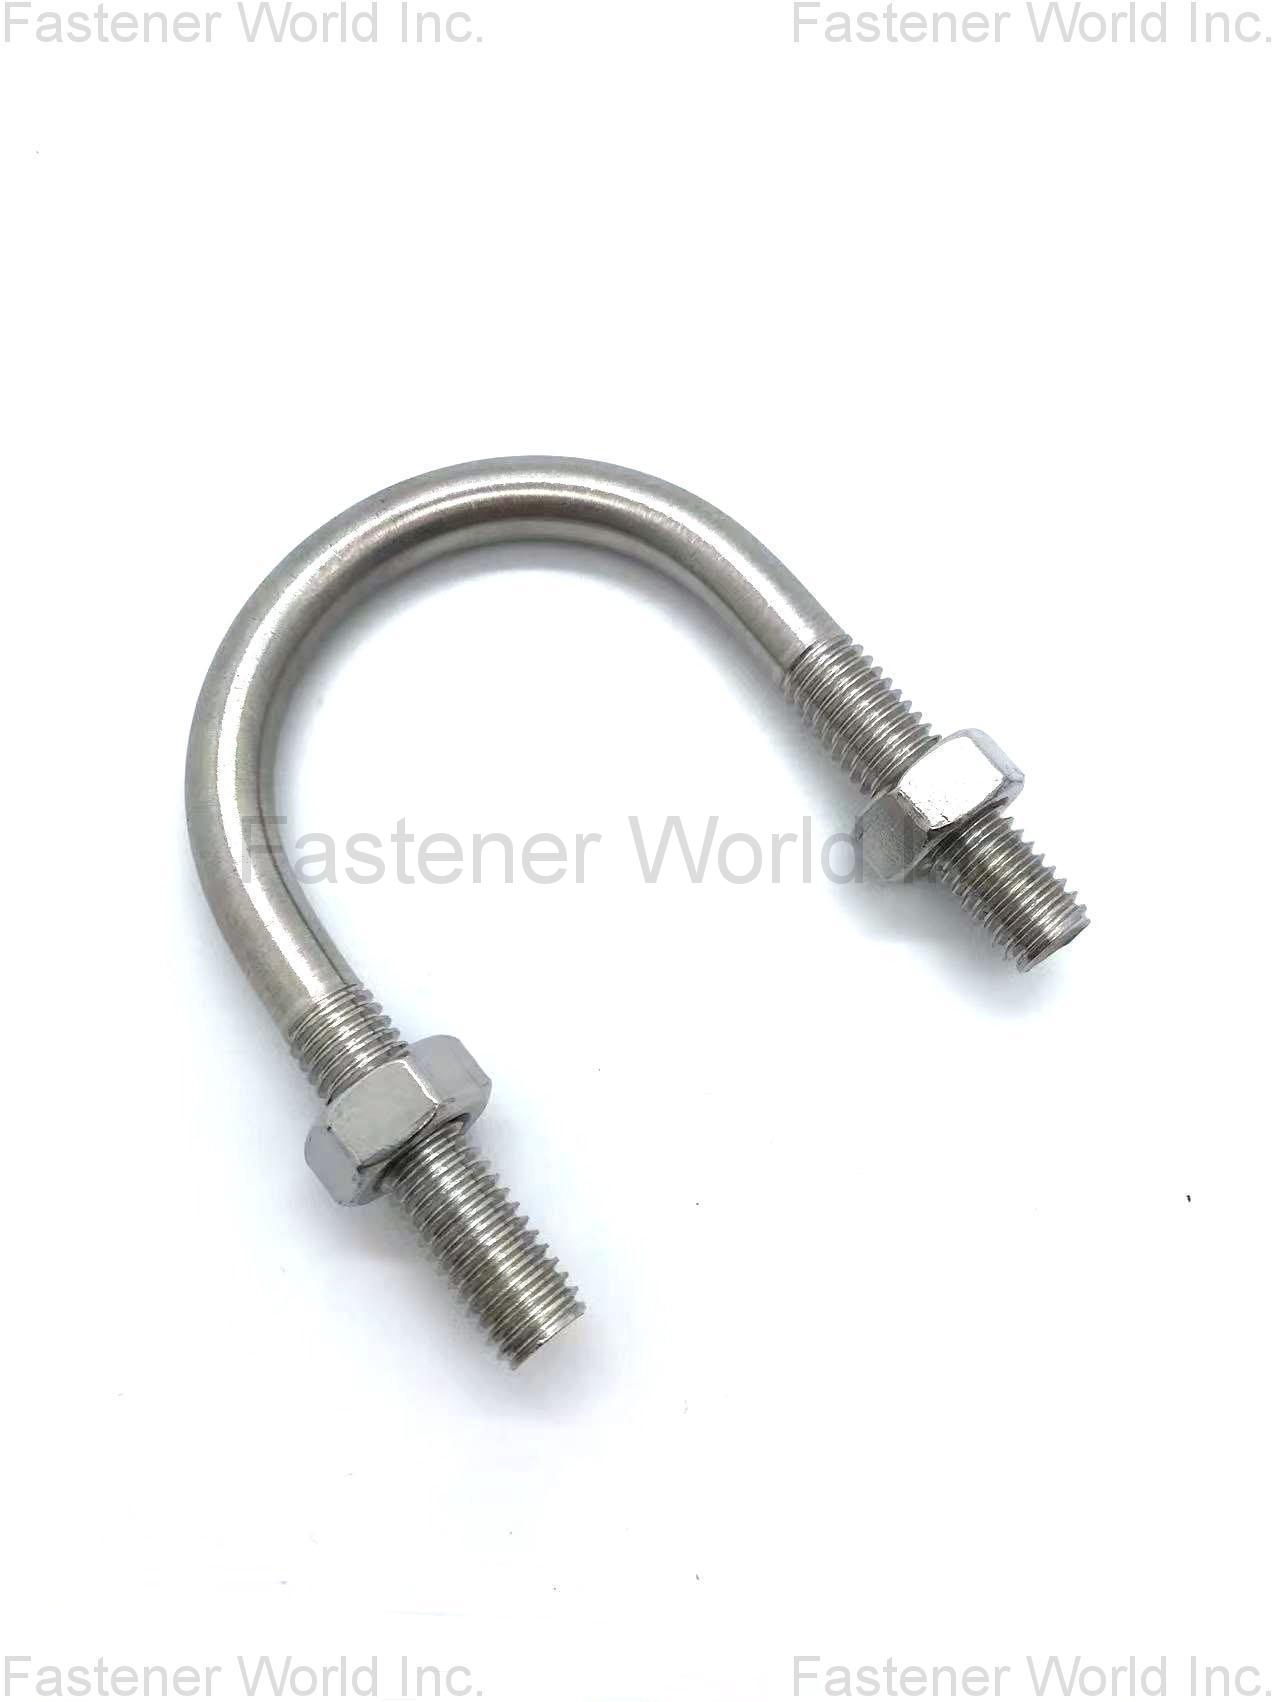 JIAXING AOKE HARDWARE TECHNOLOGY CO., LTD. , stainless steel U bolt and nuts pipe clamp